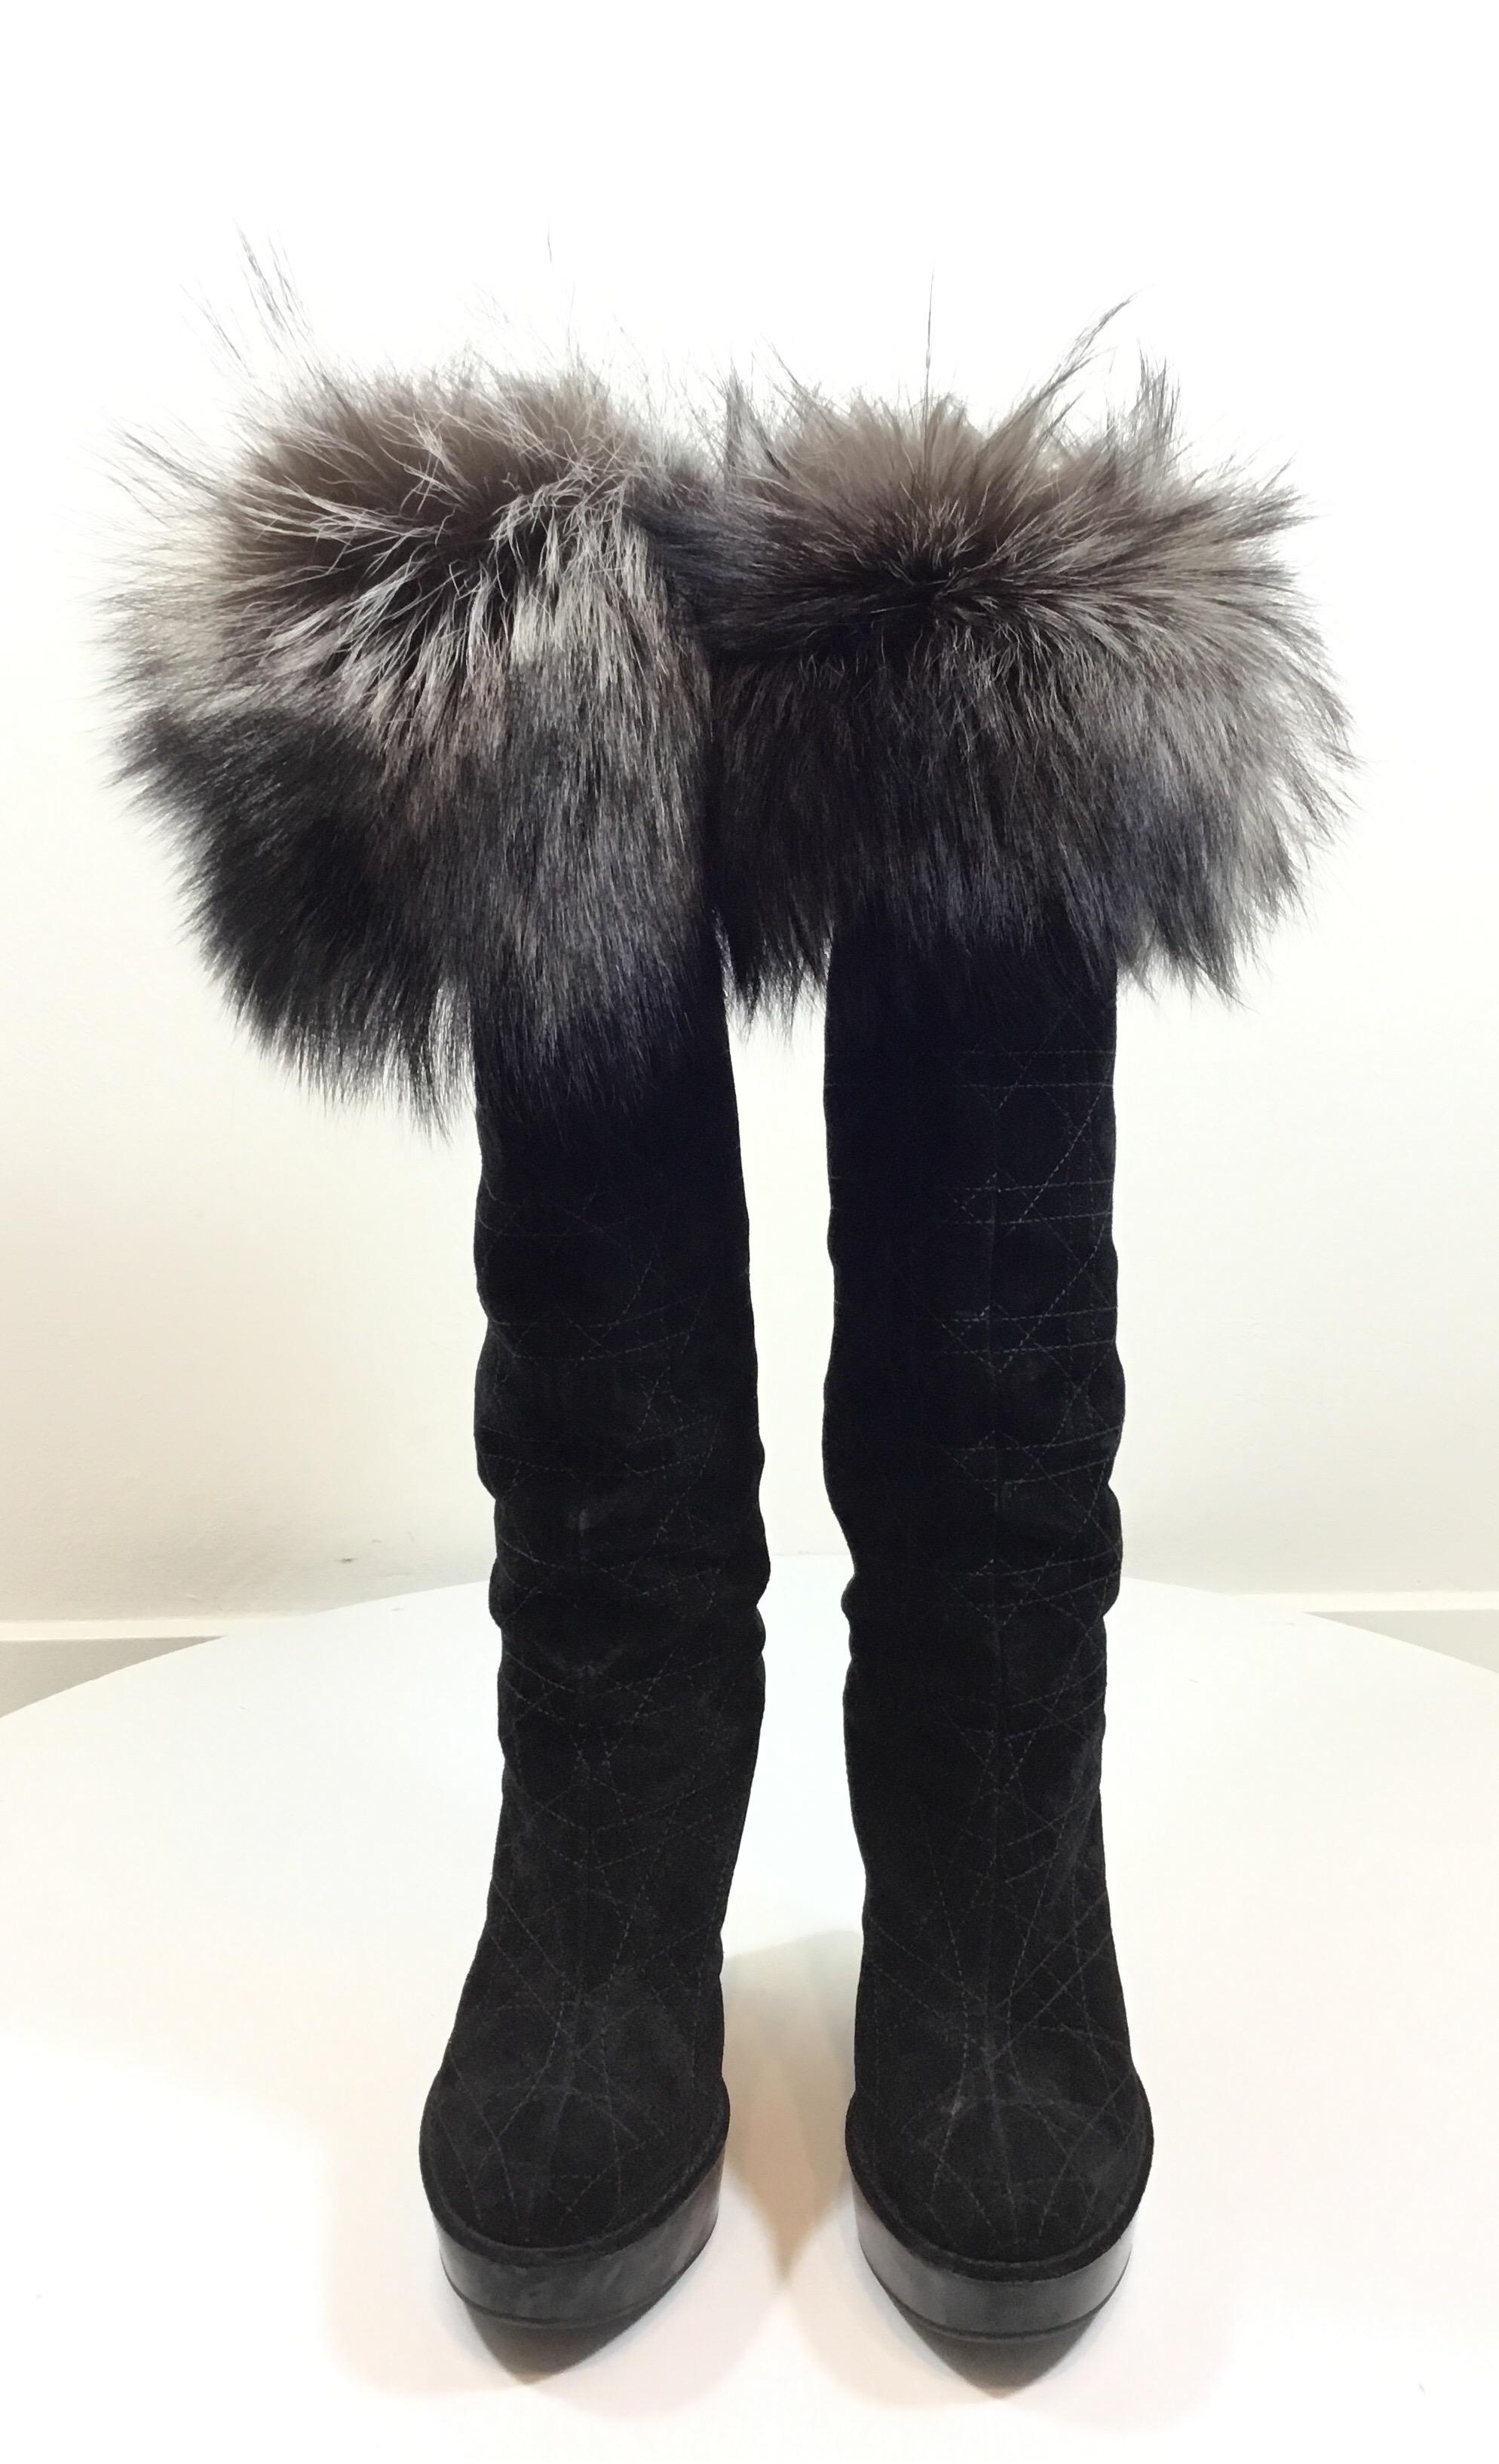 Christian Dior suede boots designed with a Cannage quilt and fox fur trims. Boots are also embellished with crystal D charms on the counters and have a wedge heel measuring approximately 4.5 inches. Size 37, made in Italy. 